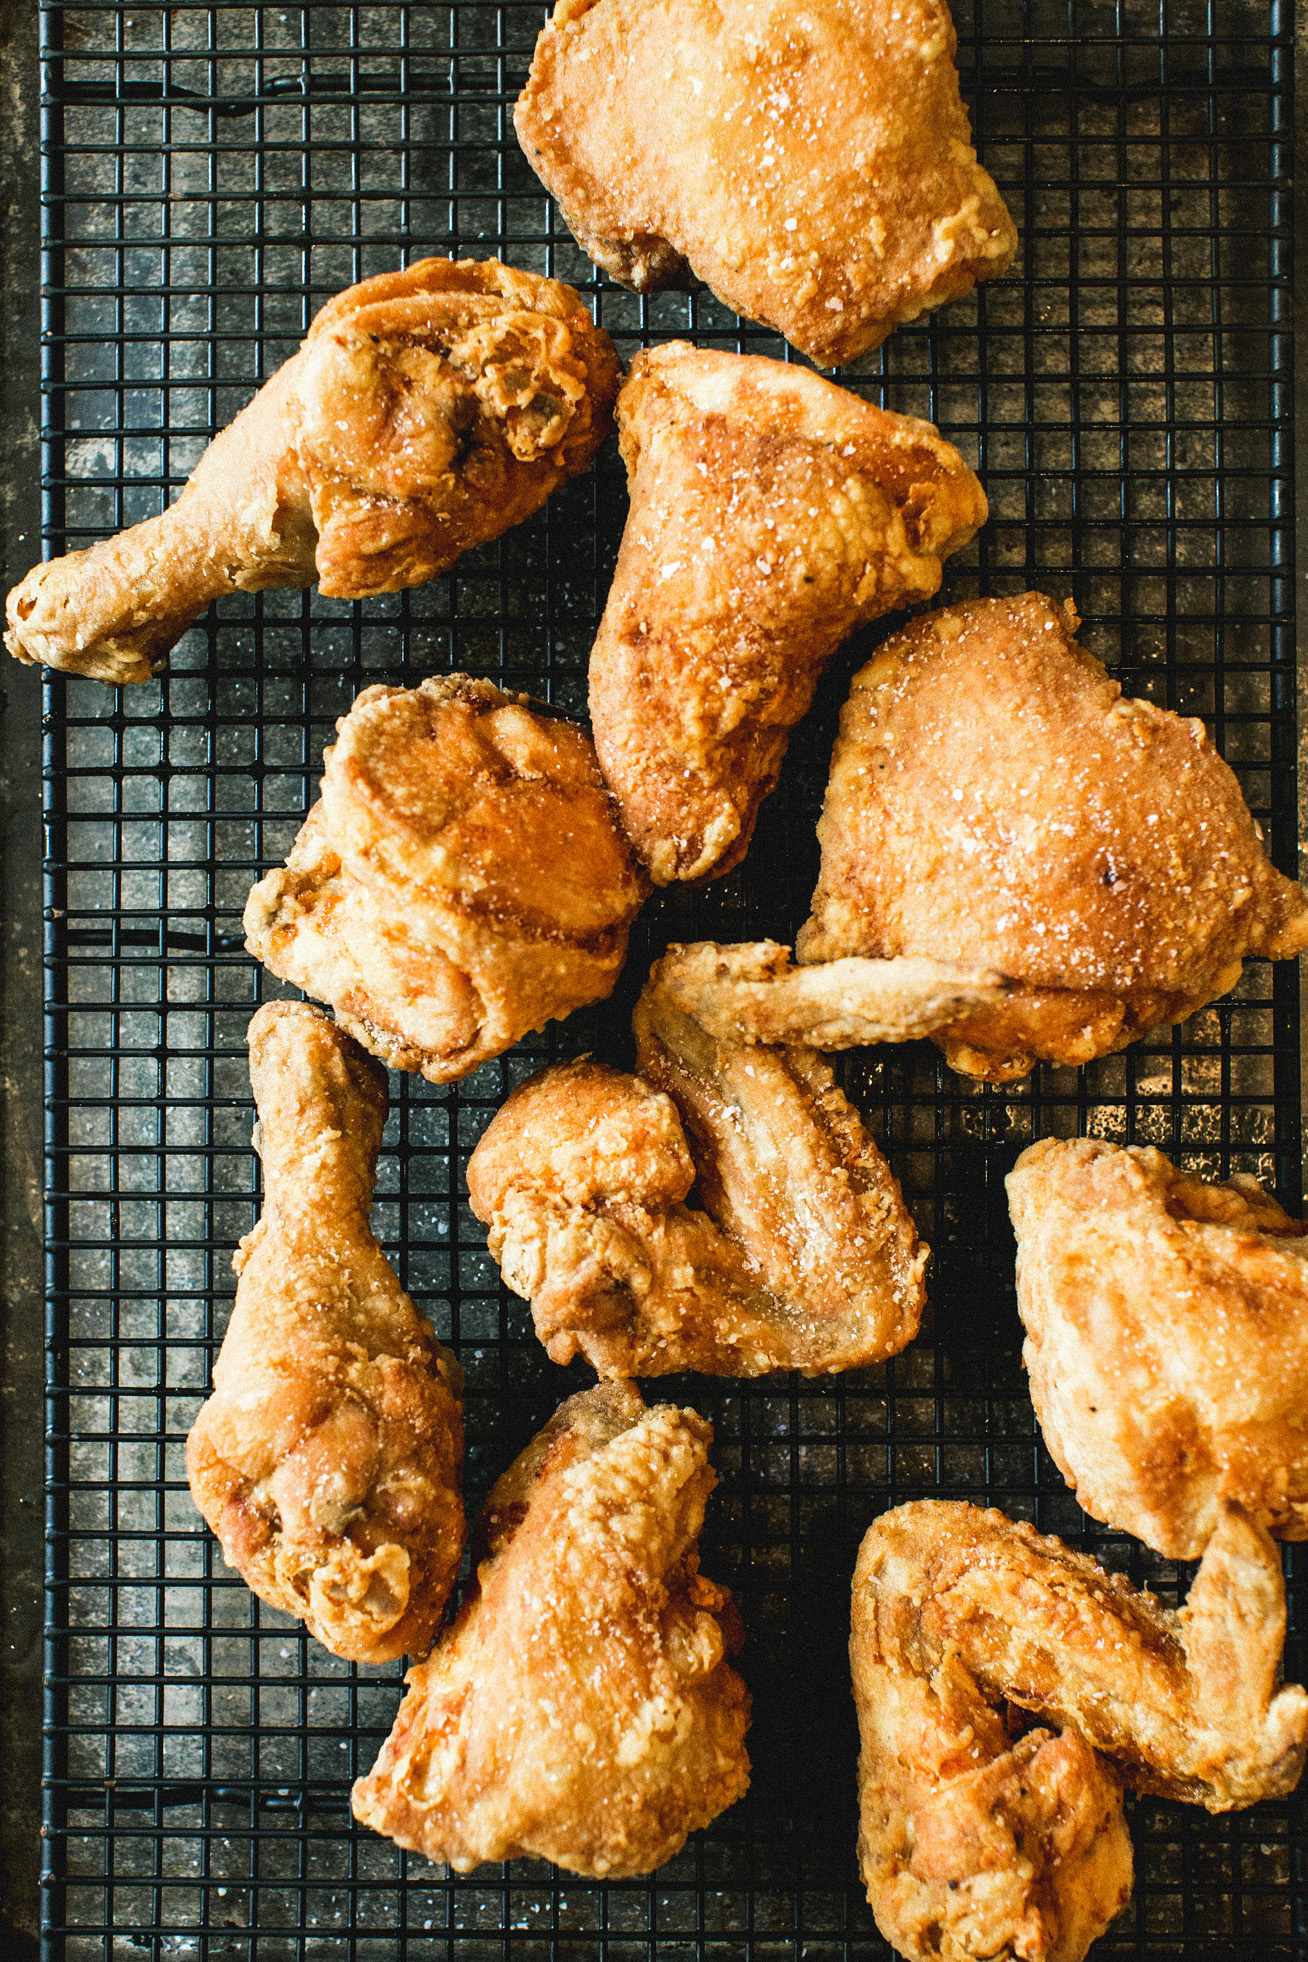 How to make perfect fried chicken